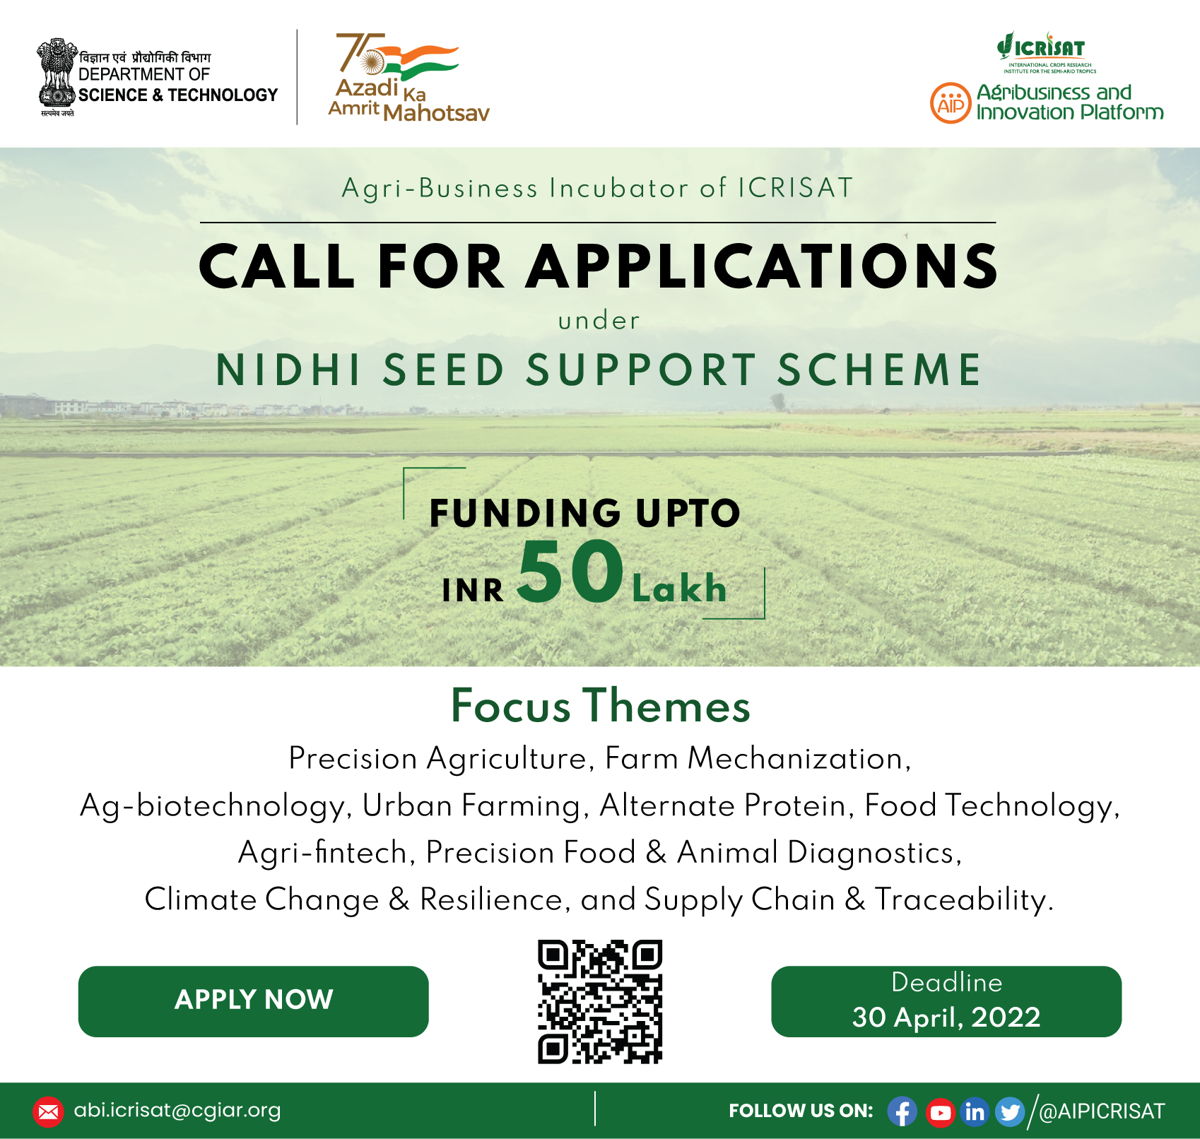 Call for Applications under NIDHI-SSS